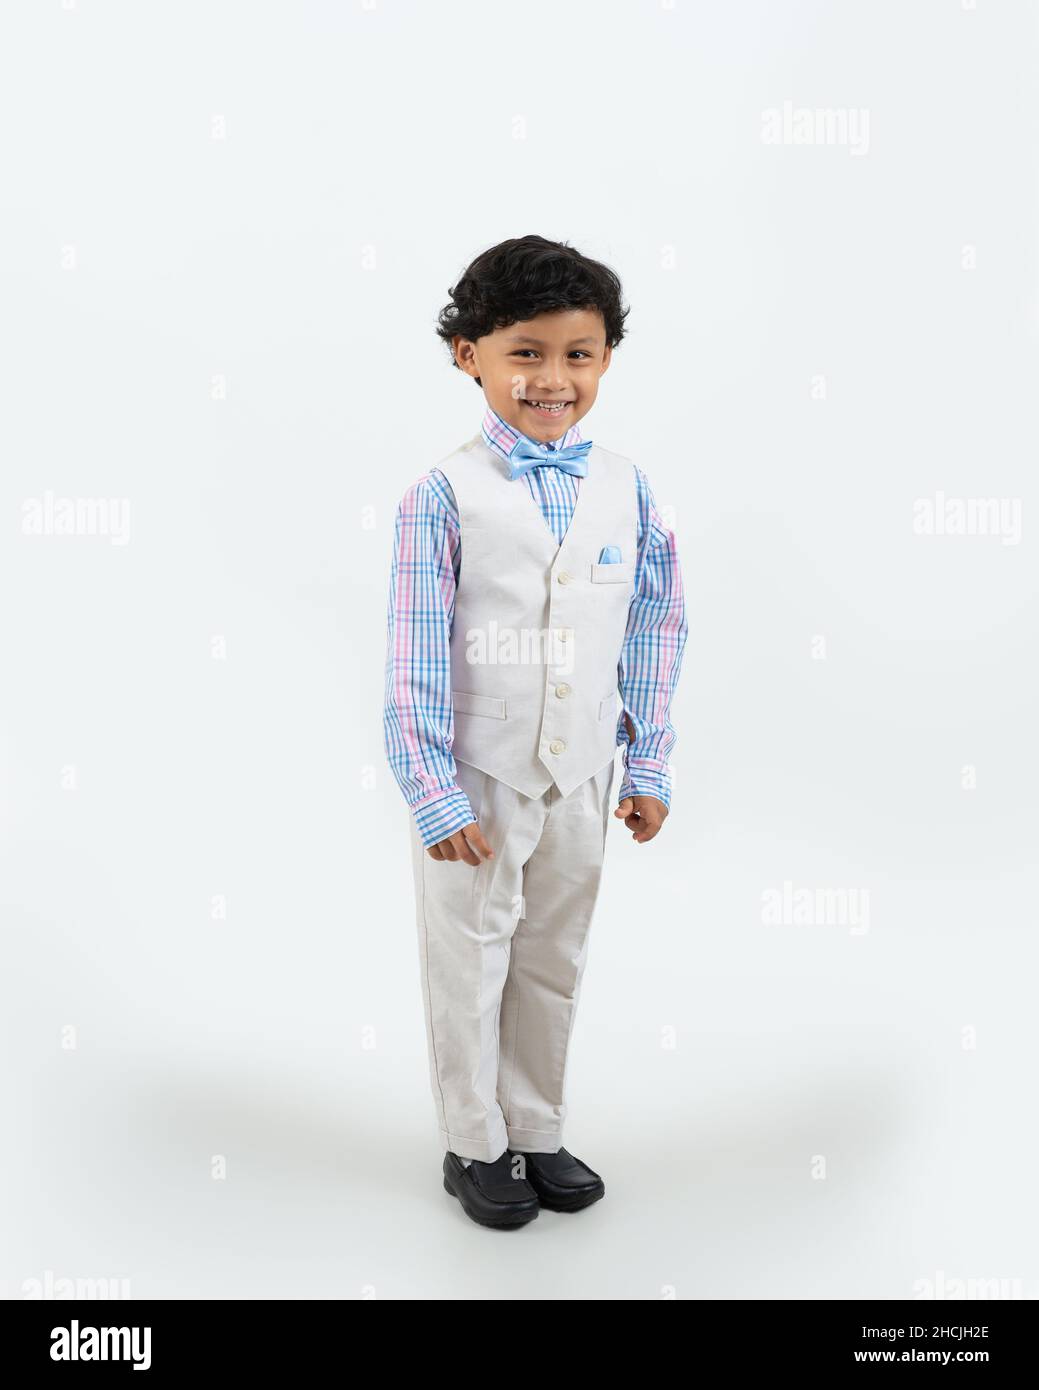 Closeup portrait of 4 or 5 year old boy, smiling, white background,  full length, wearing formal white suit Stock Photo